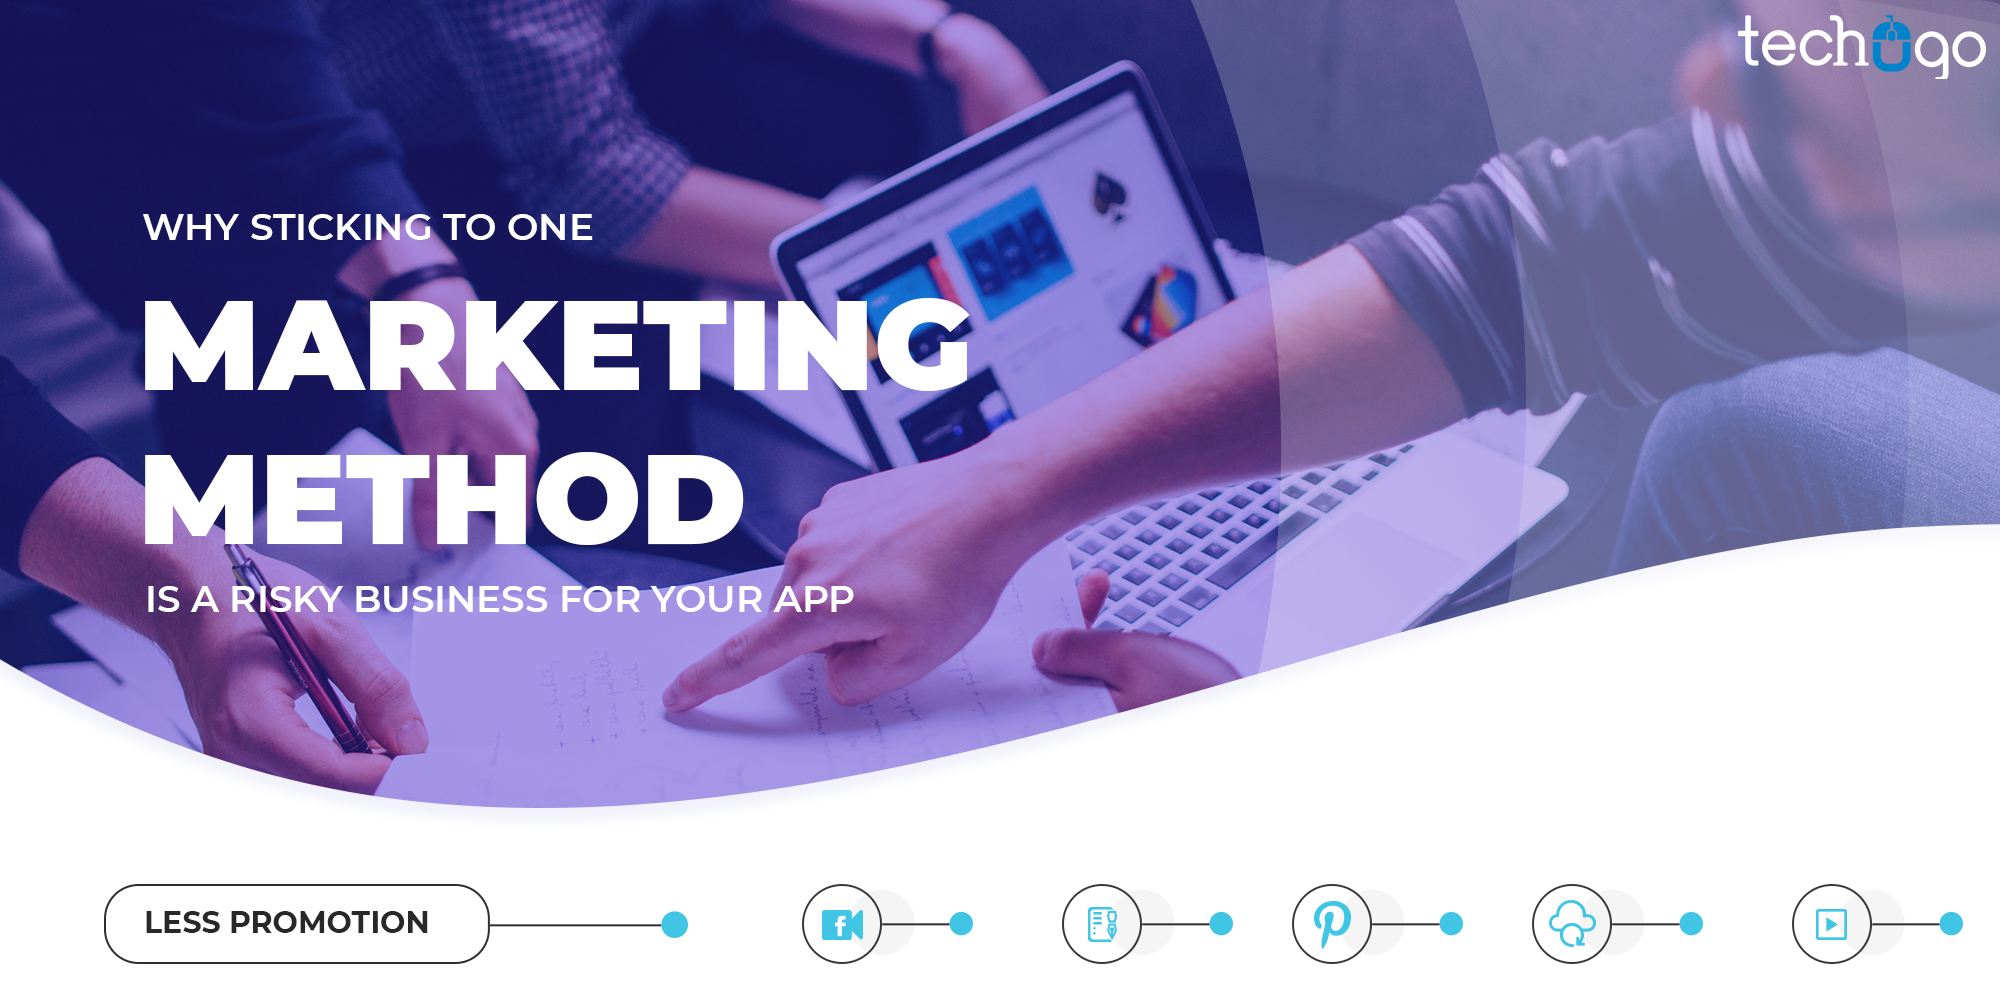 Why Sticking To One Marketing Method Is A Risky Business For Your App